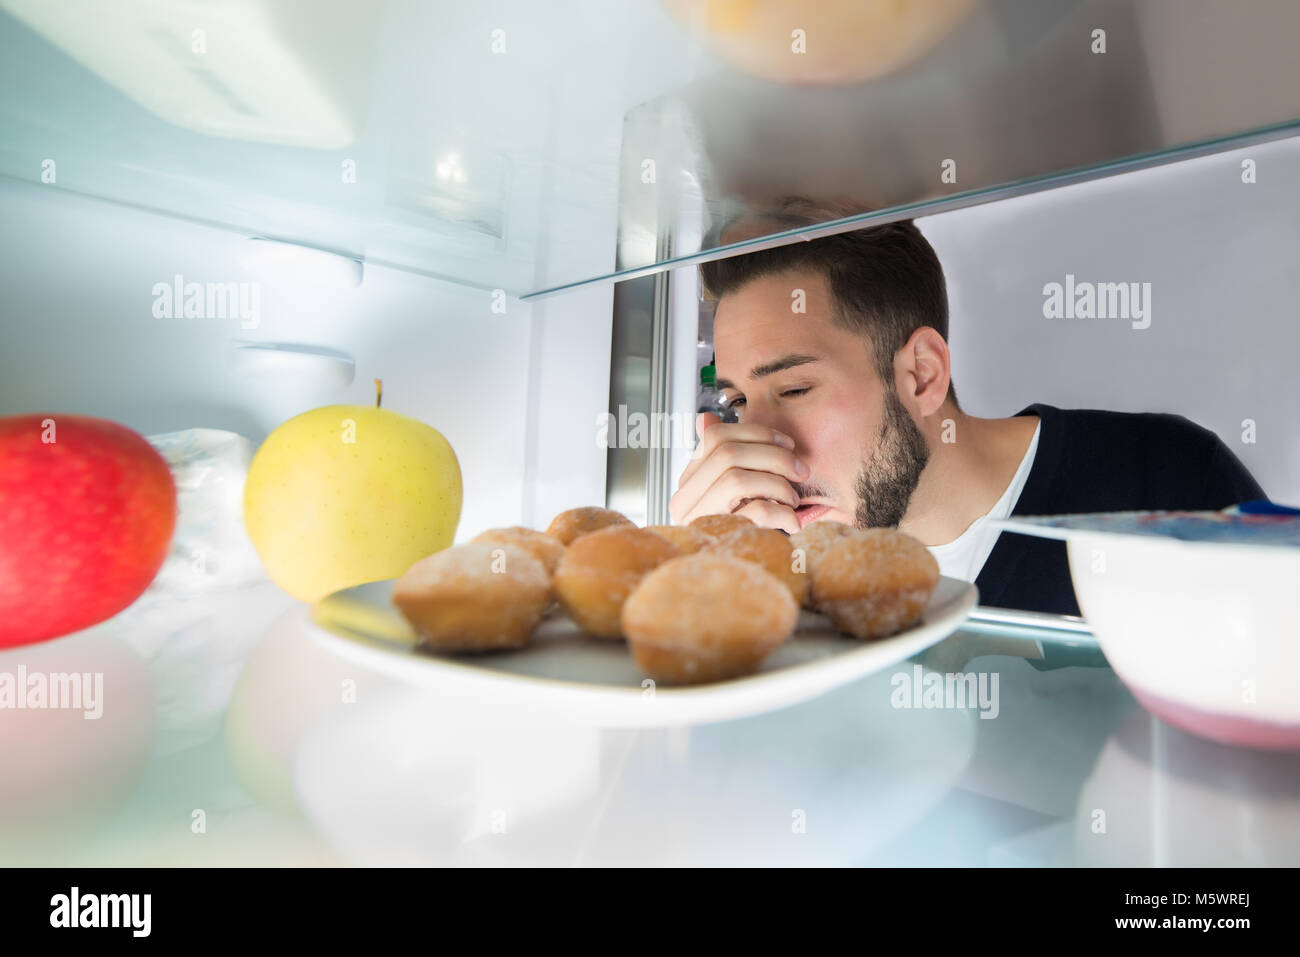 Close-up Of A Young Man Holding His Nose Near Foul Food In Refrigerator Stock Photo